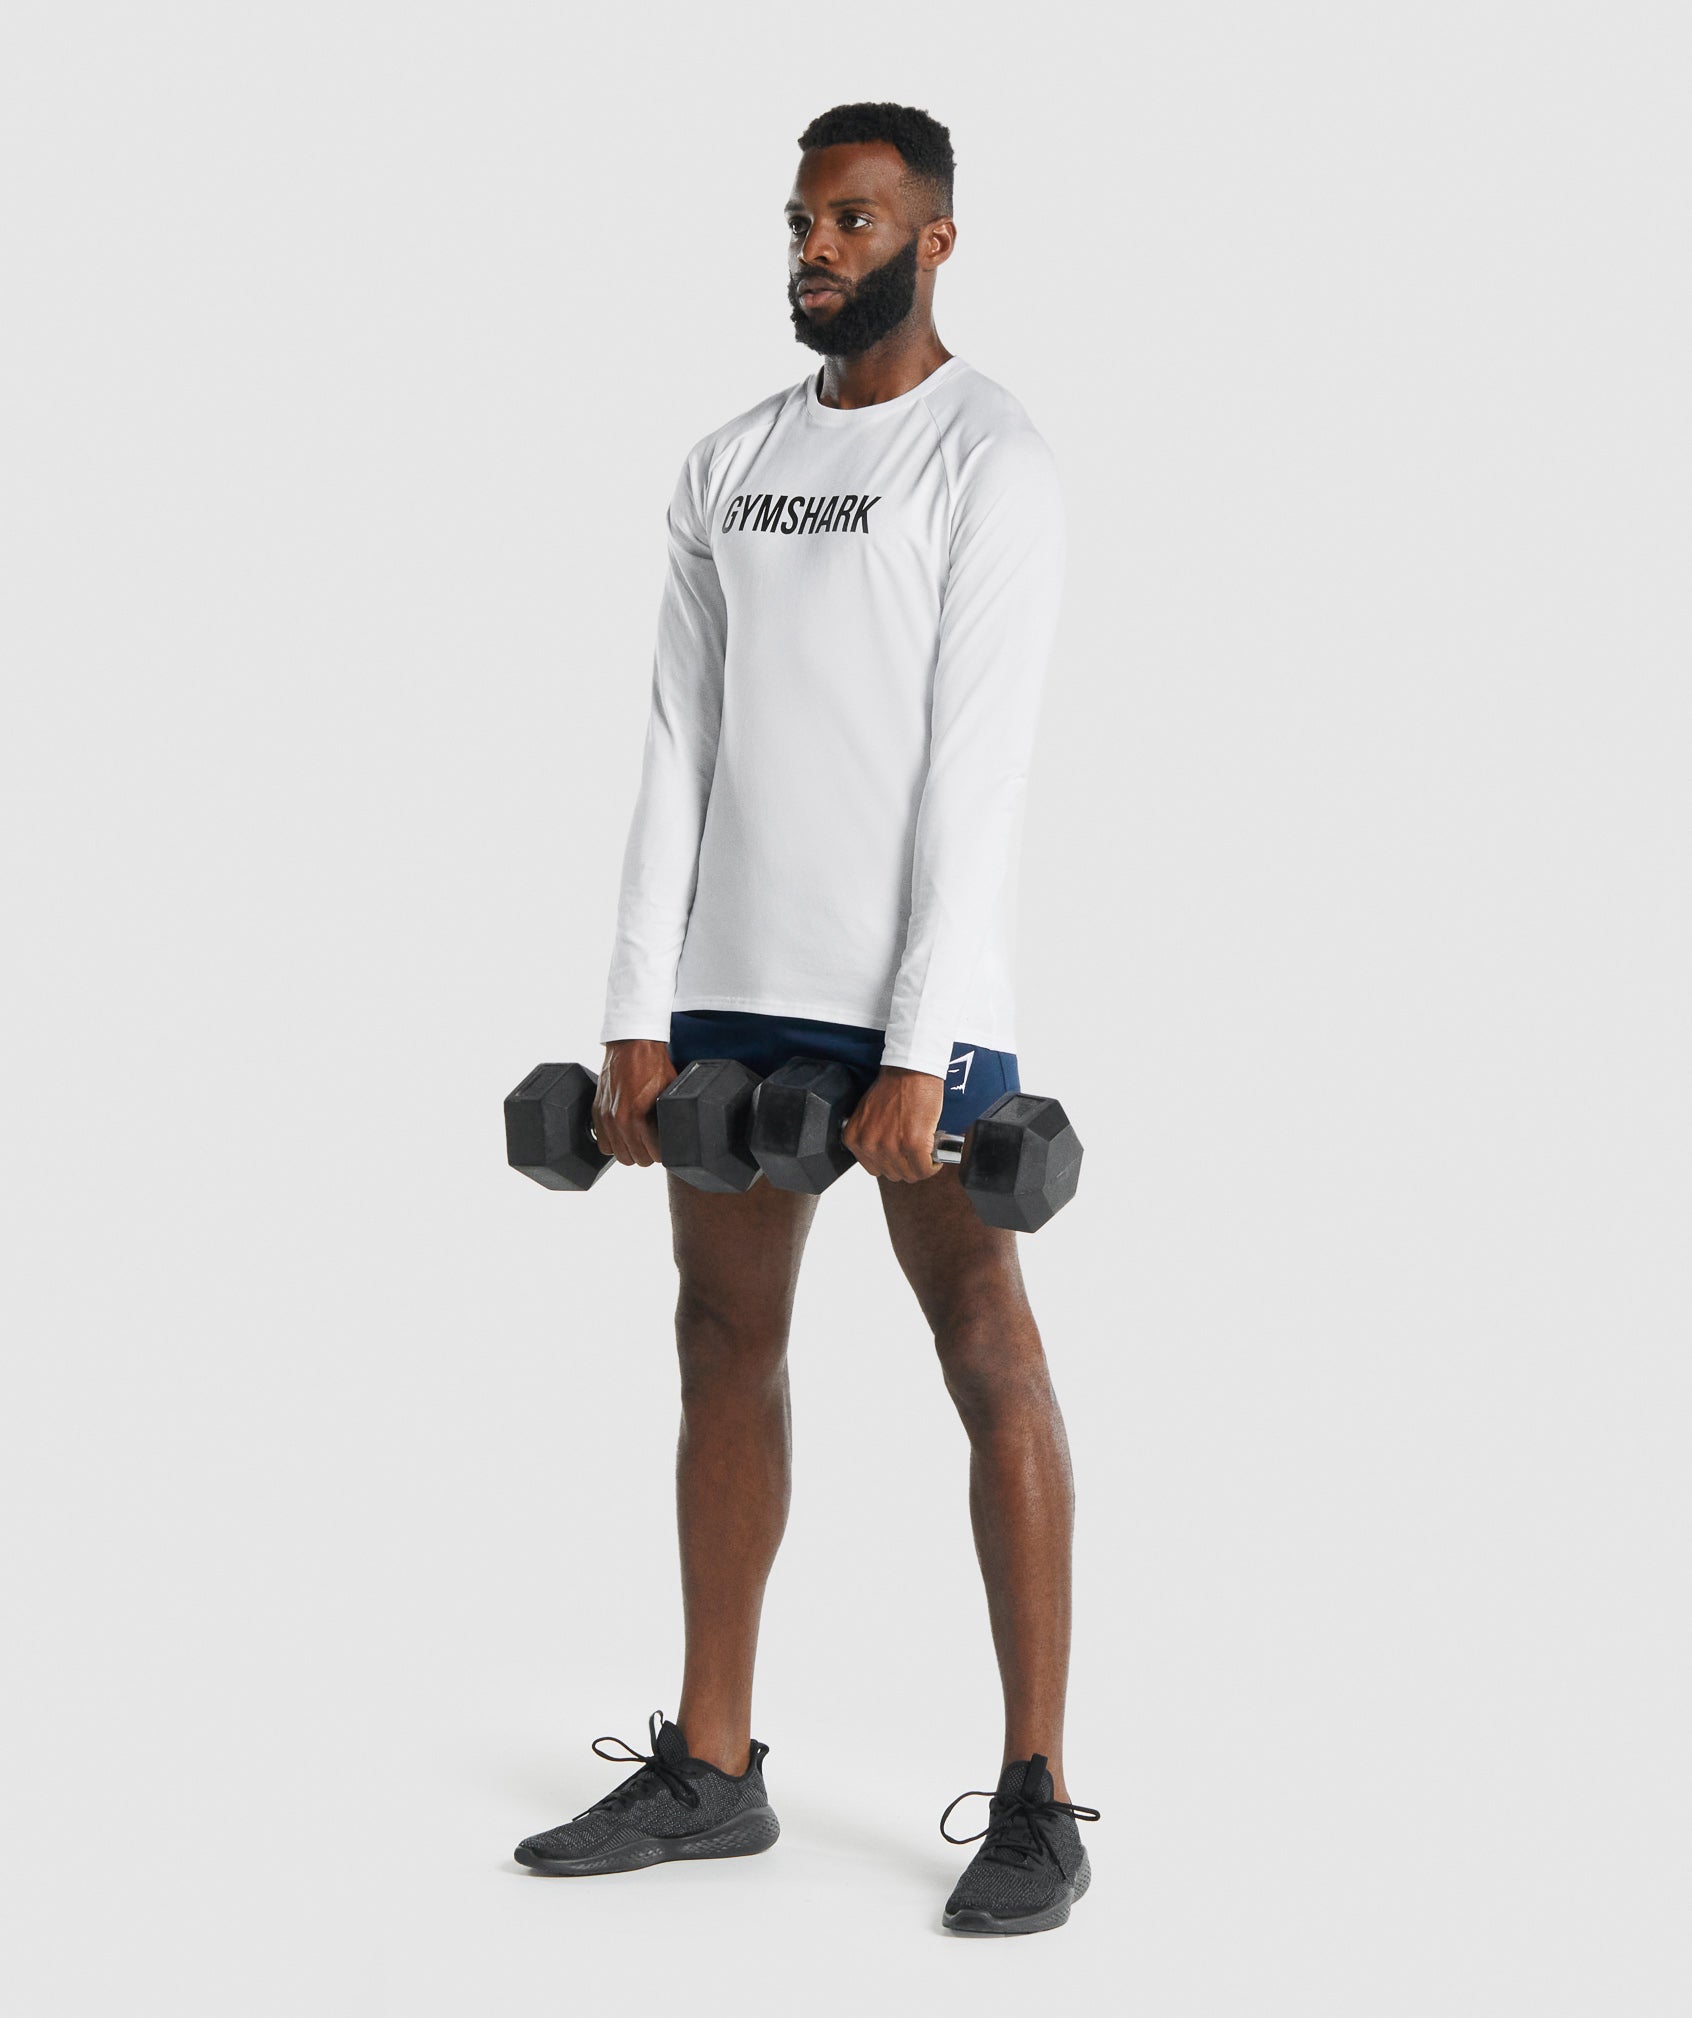 Apollo Long Sleeve T-Shirt in White - view 5